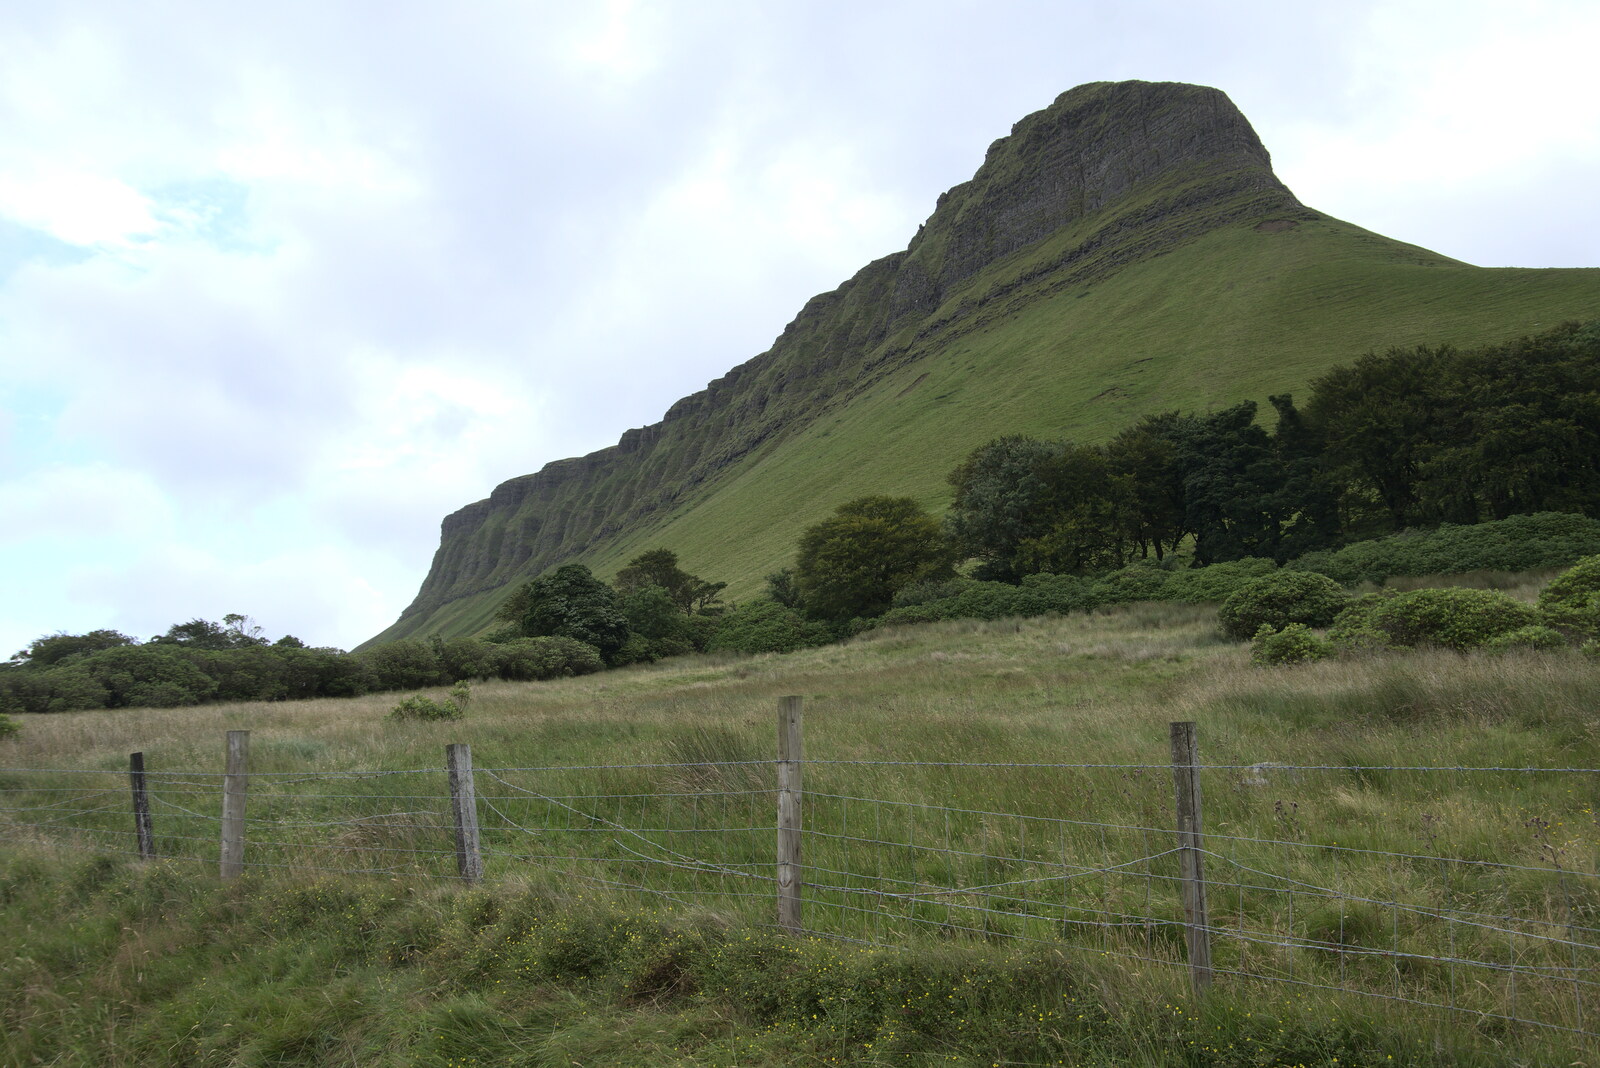 A first clear view of Benbulben from Walks Around Benbulben and Carrowmore, County Sligo, Ireland - 13th August 2021